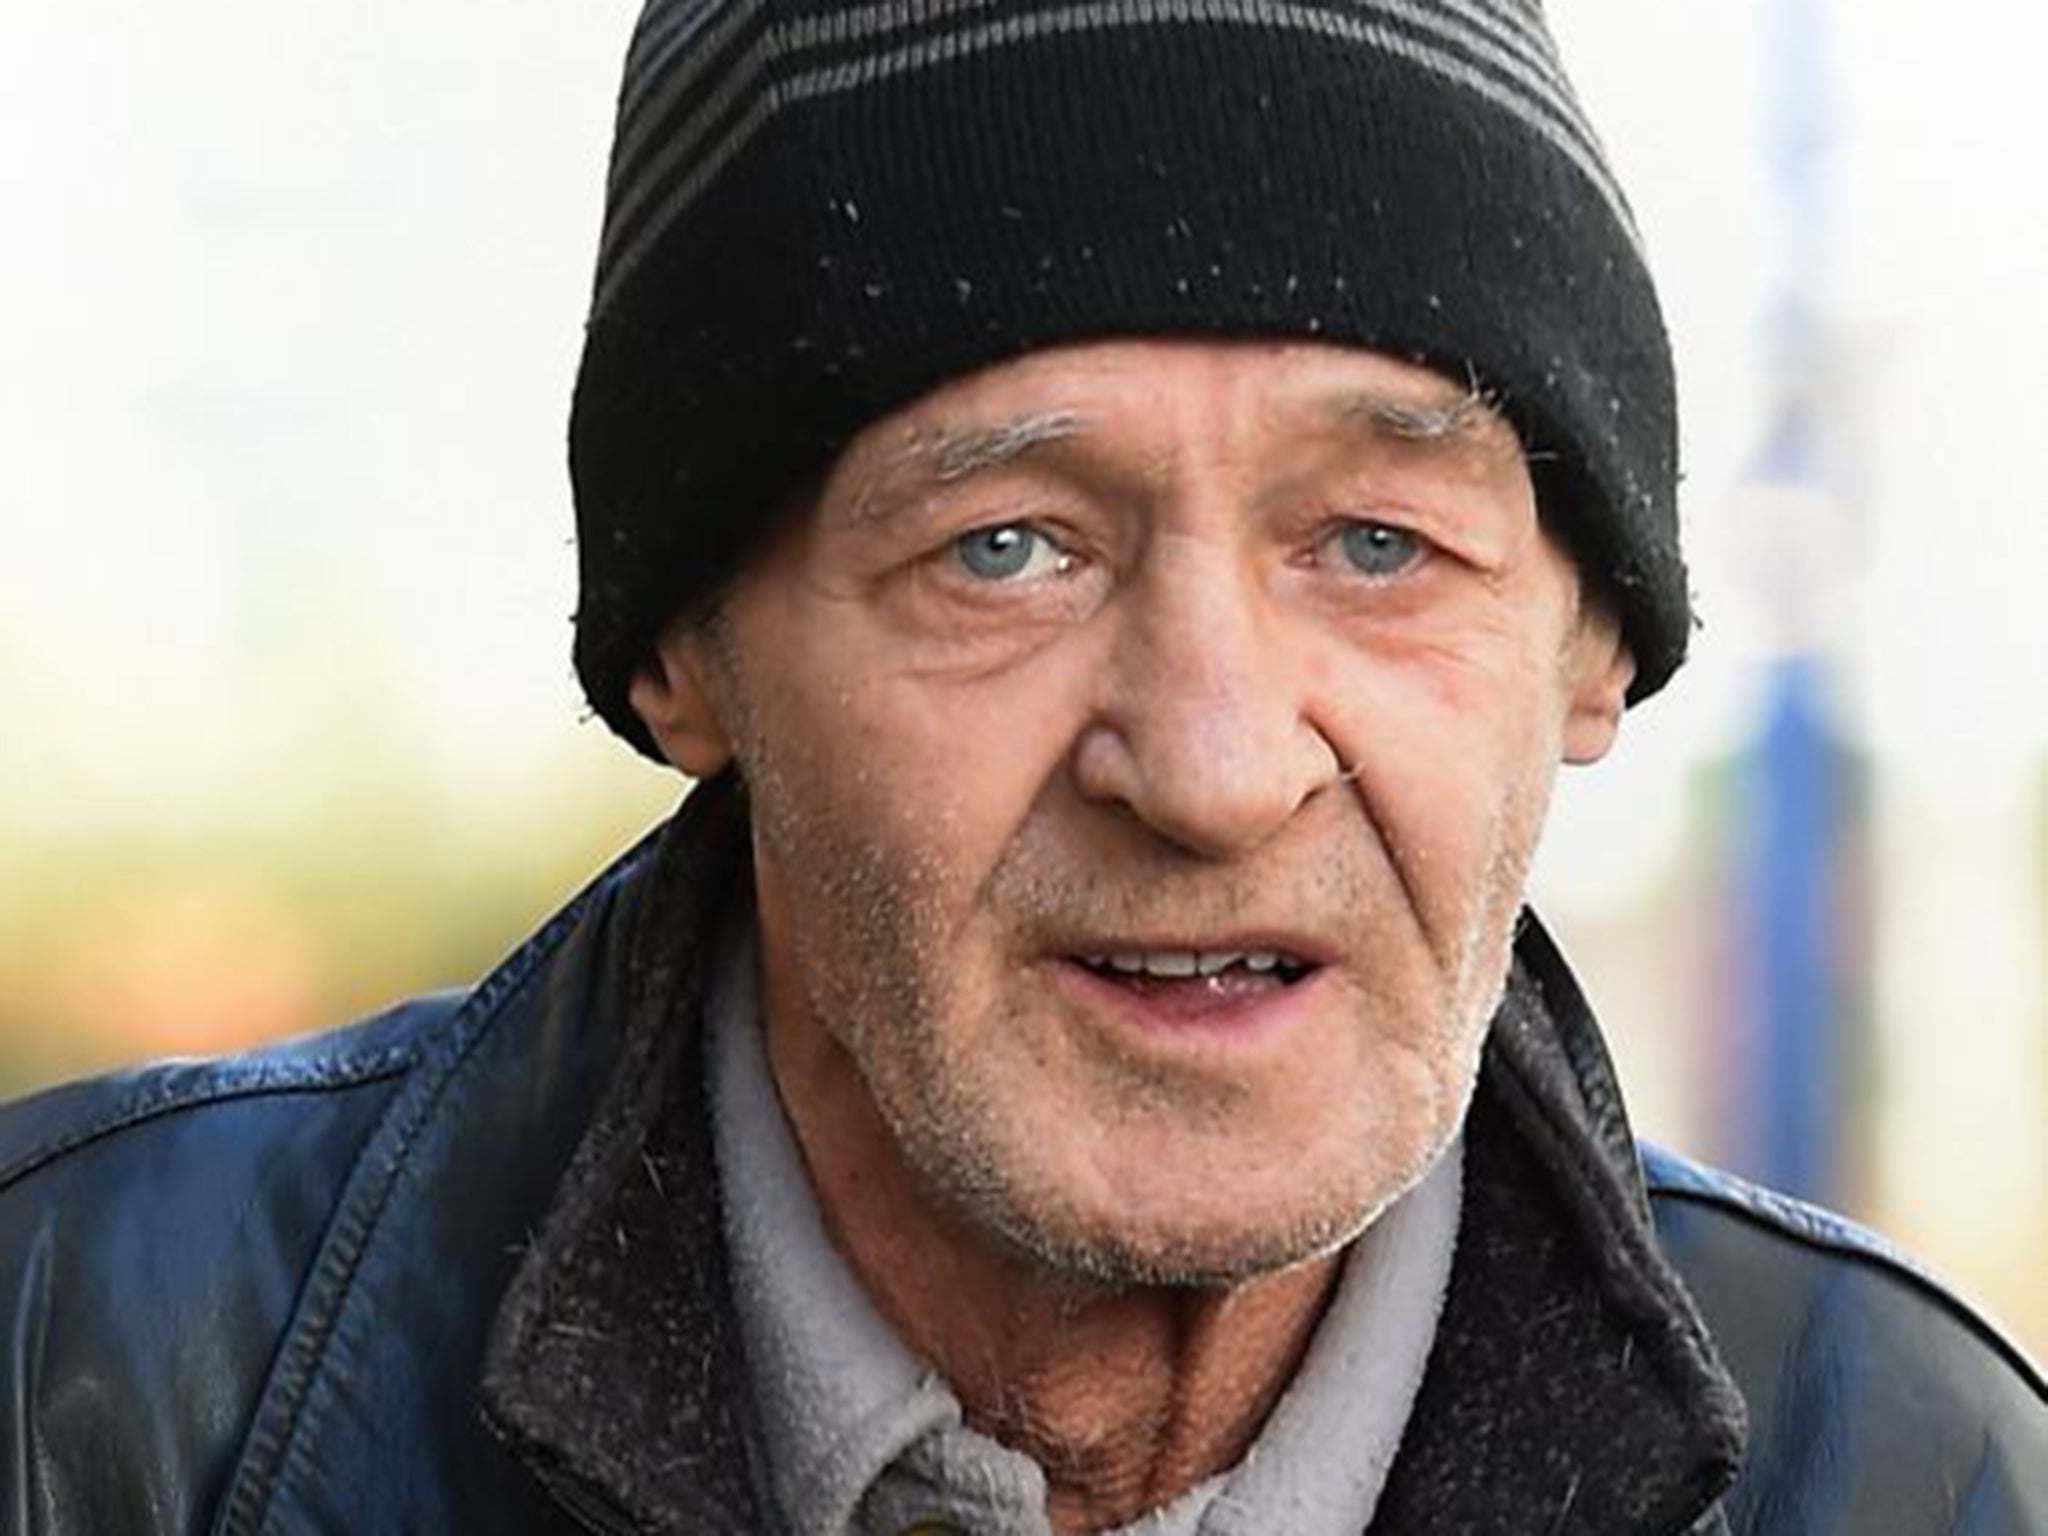 &#13;
71-year-old Paddy Hill today &#13;